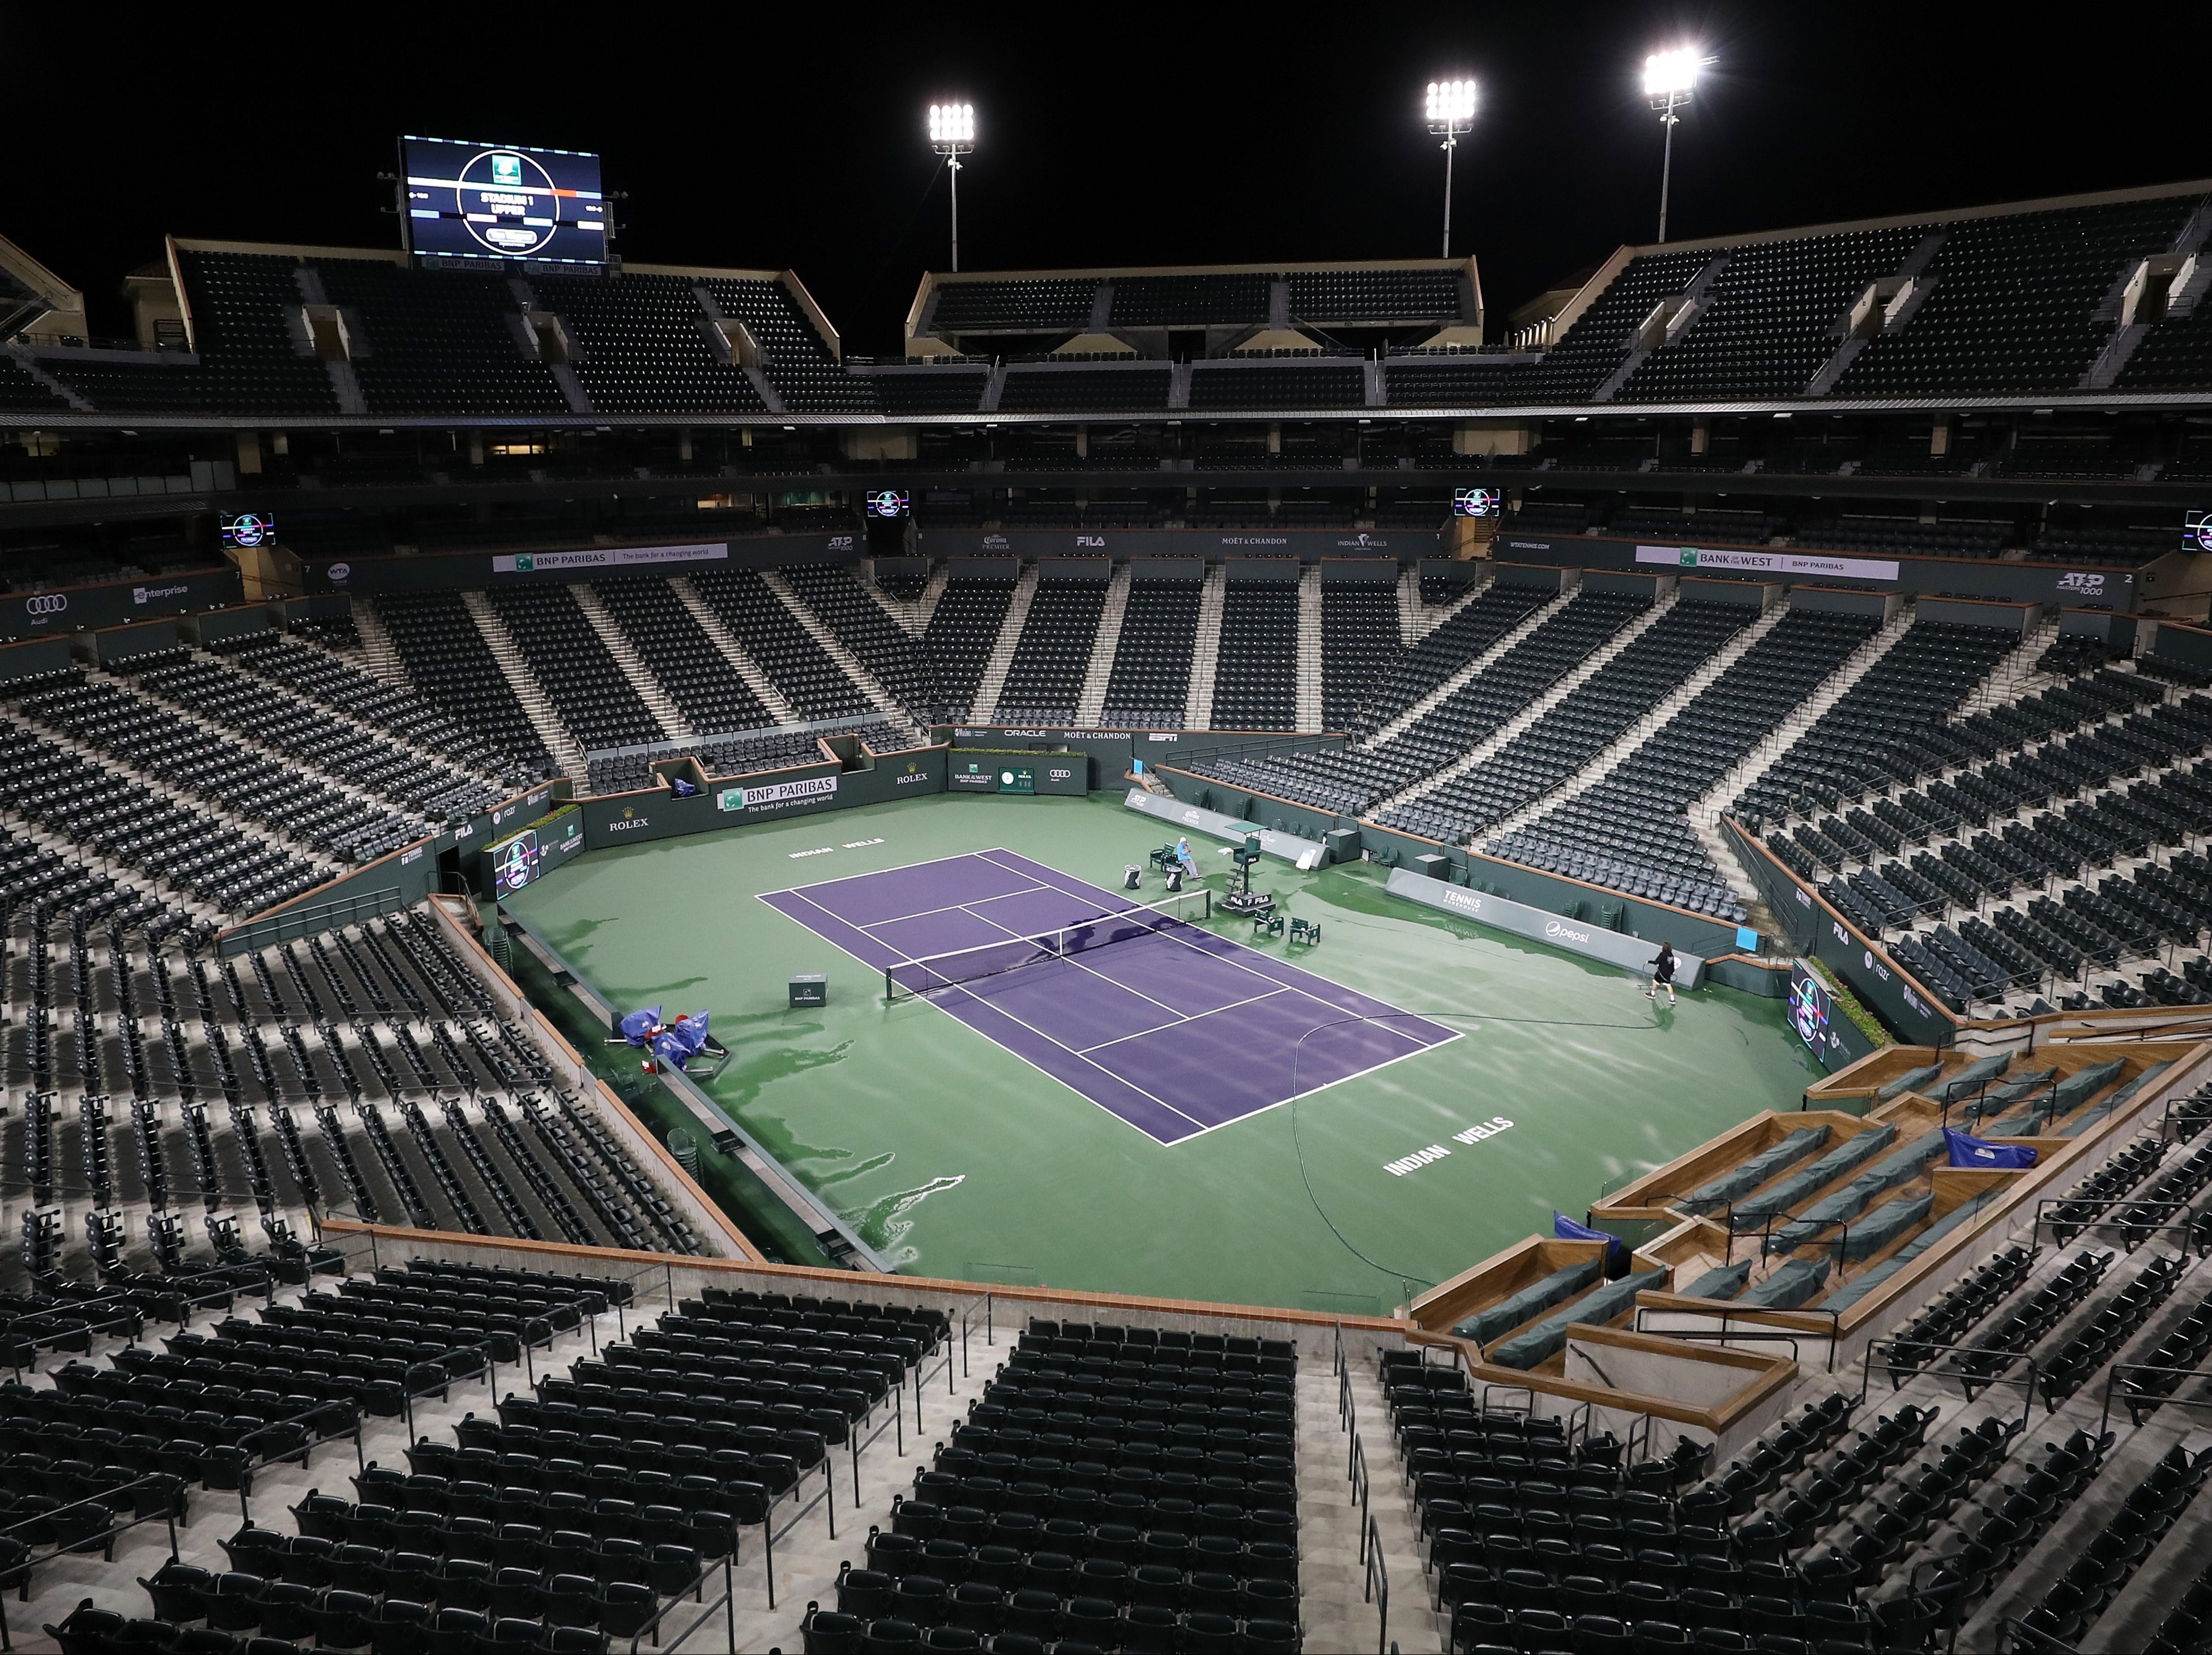 Indian Wells was one of the first major sports events to be shelved in 2020